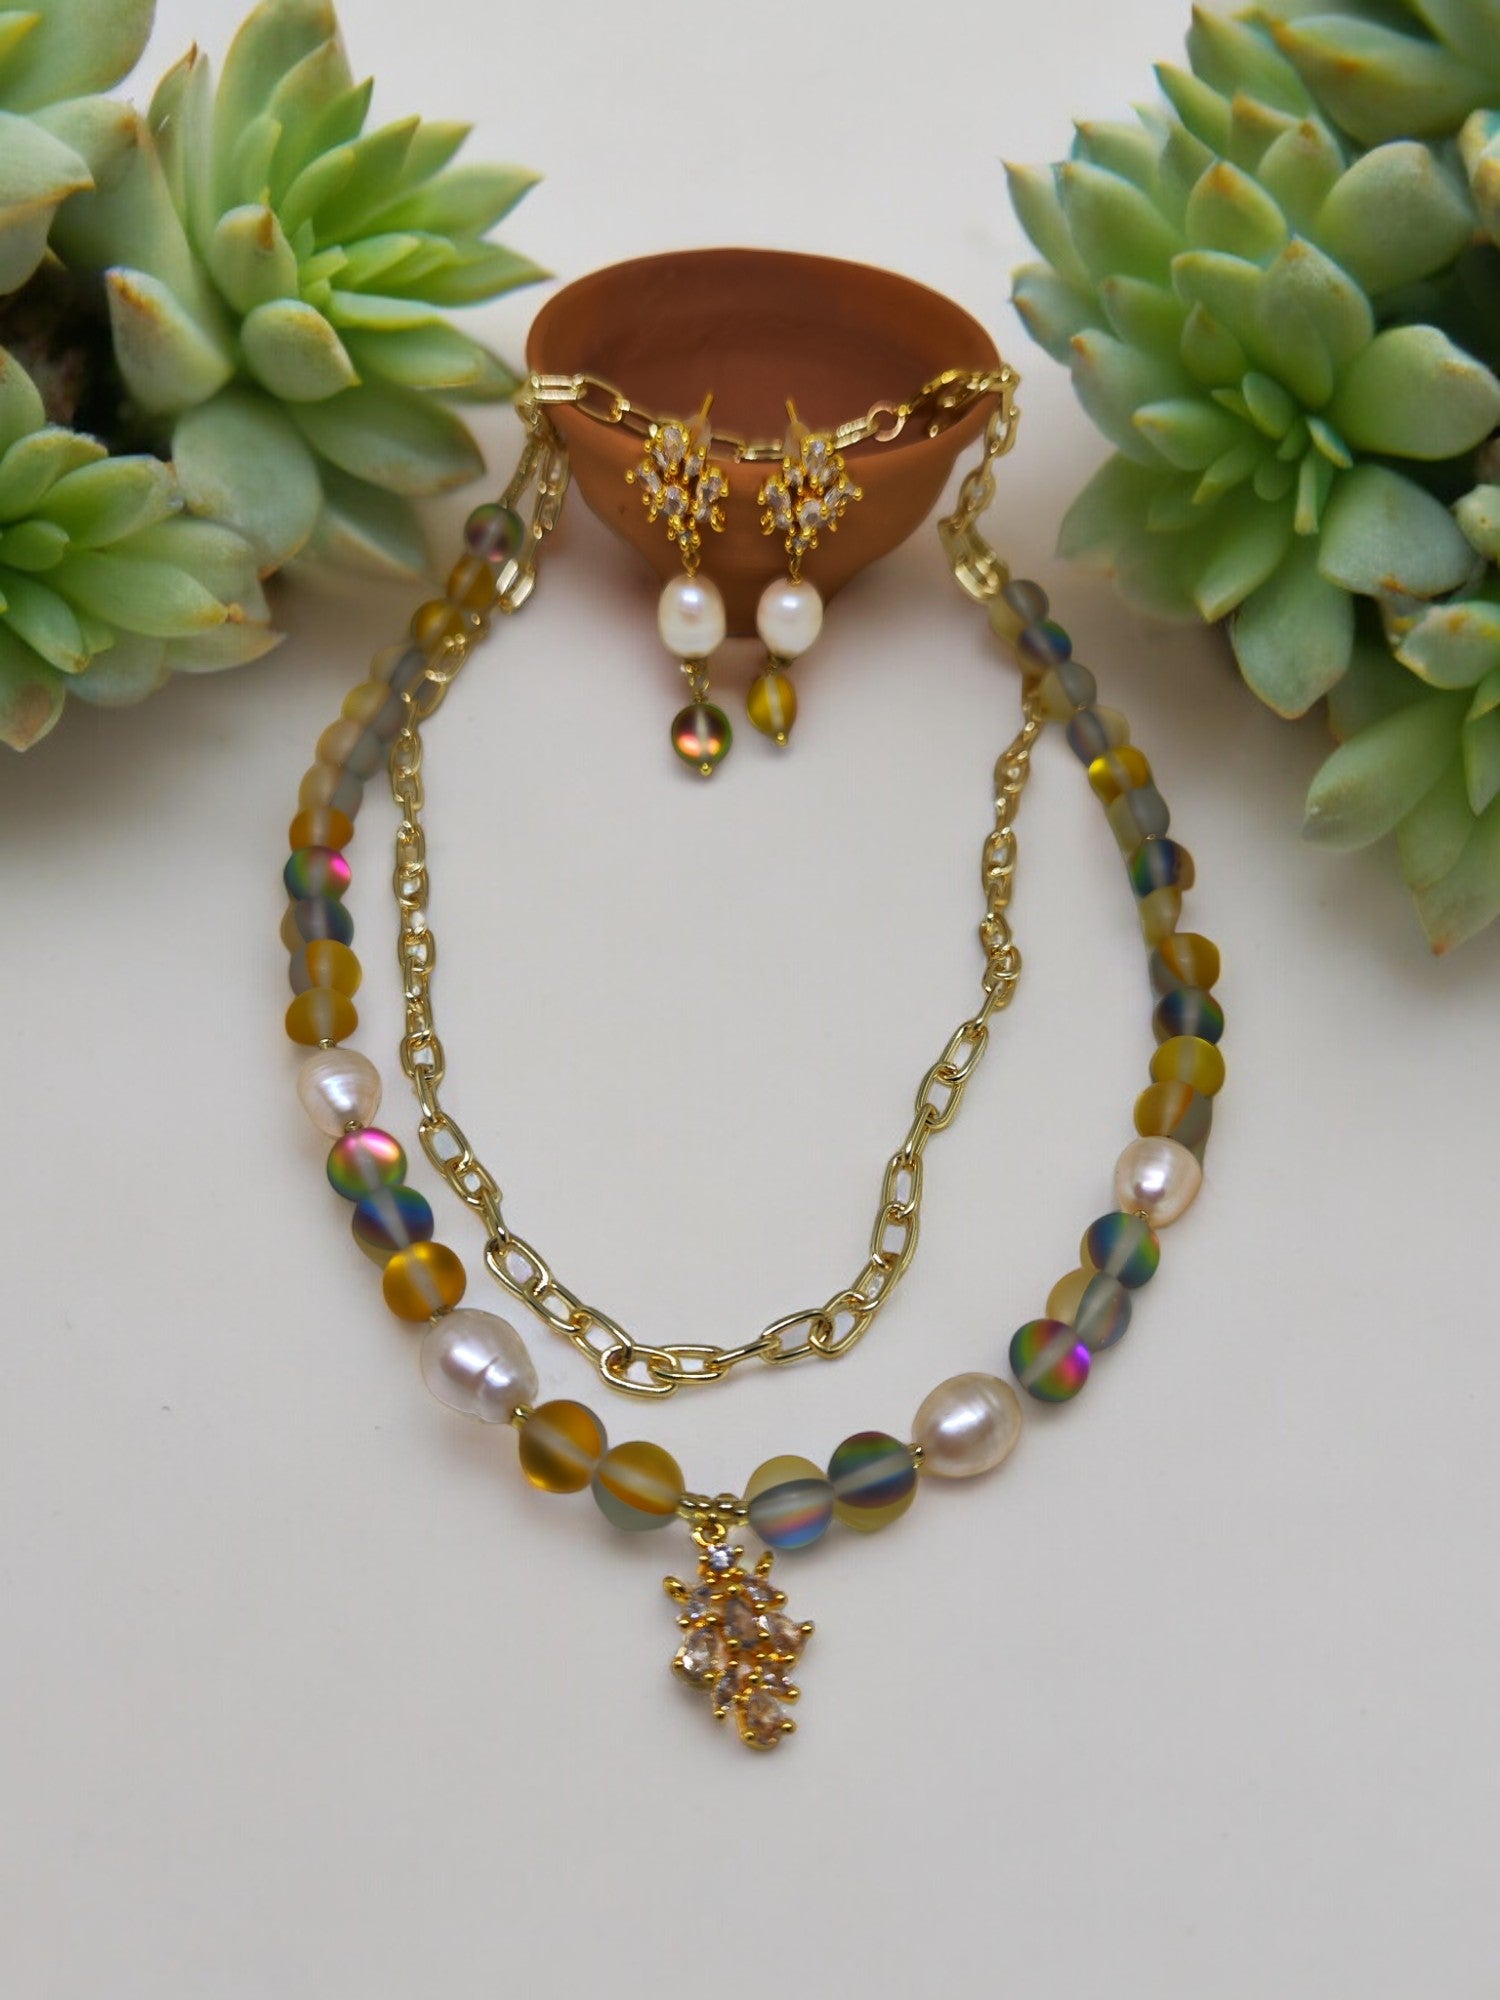 Add some shimmer to your look with the Juliet Beaded Jewelry set. Featuring mother of pearl beads, anti tarnish chains, and aura beads with CZ charms, this set is both stylish and durable. Shine bright with this unique and playful accessory. (No more jewelry-tarnishing woes for you!)